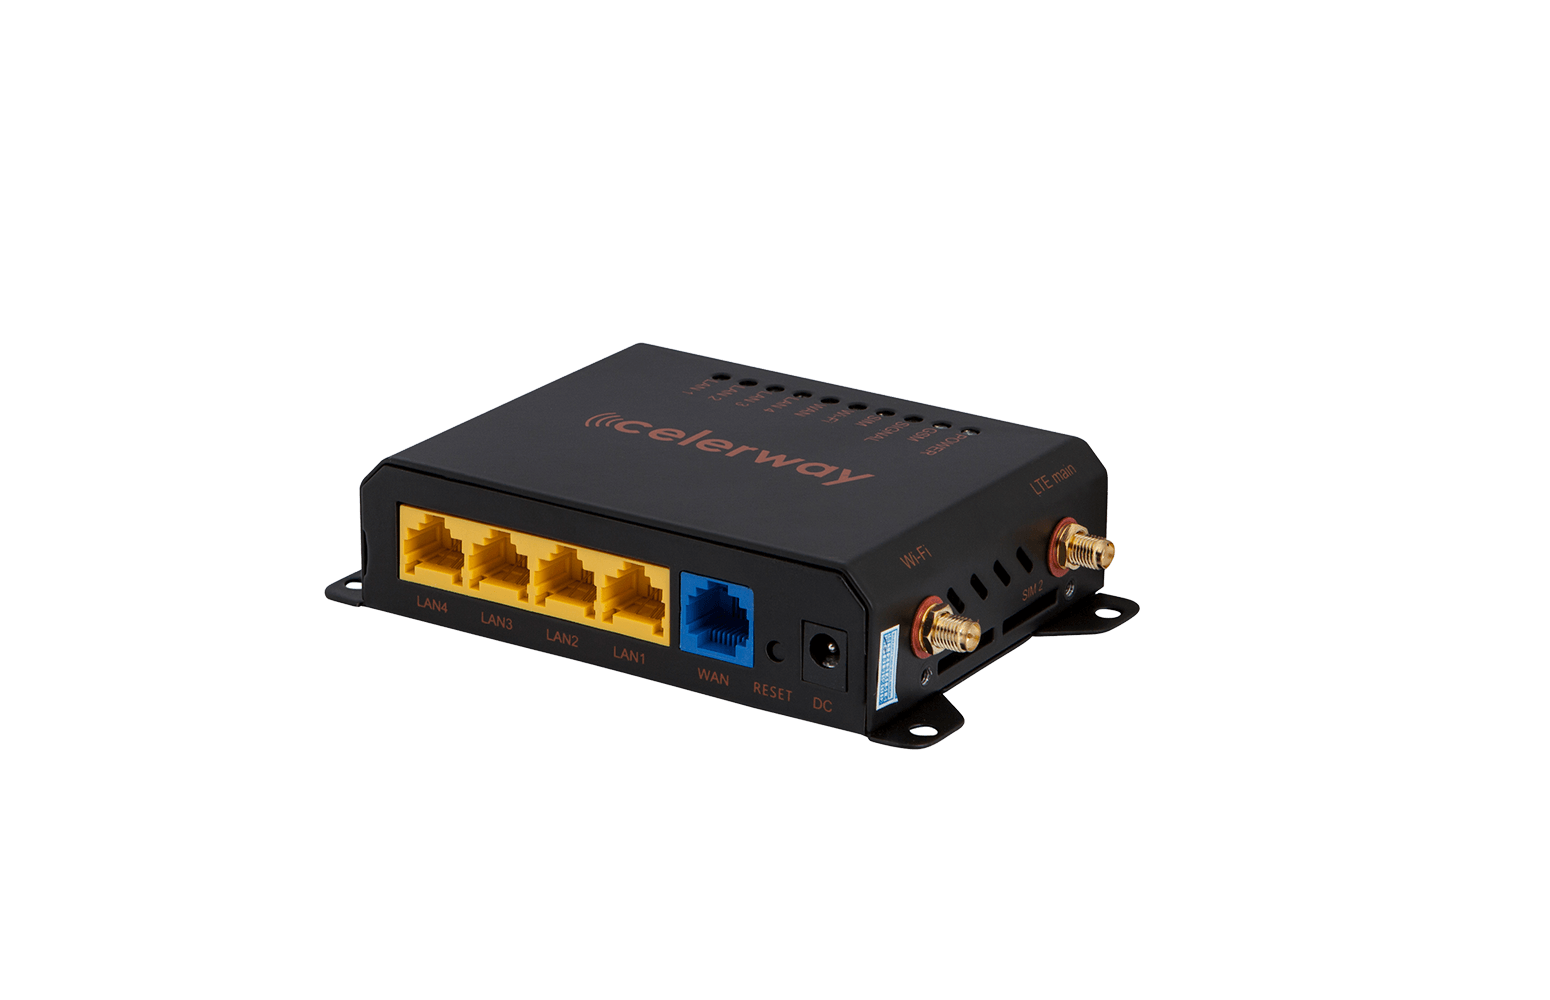 Celerway Cumulus: enables up to 6 simultaneous WAN connections (1 cellular), providing connectivity with 4G backup for remote devices